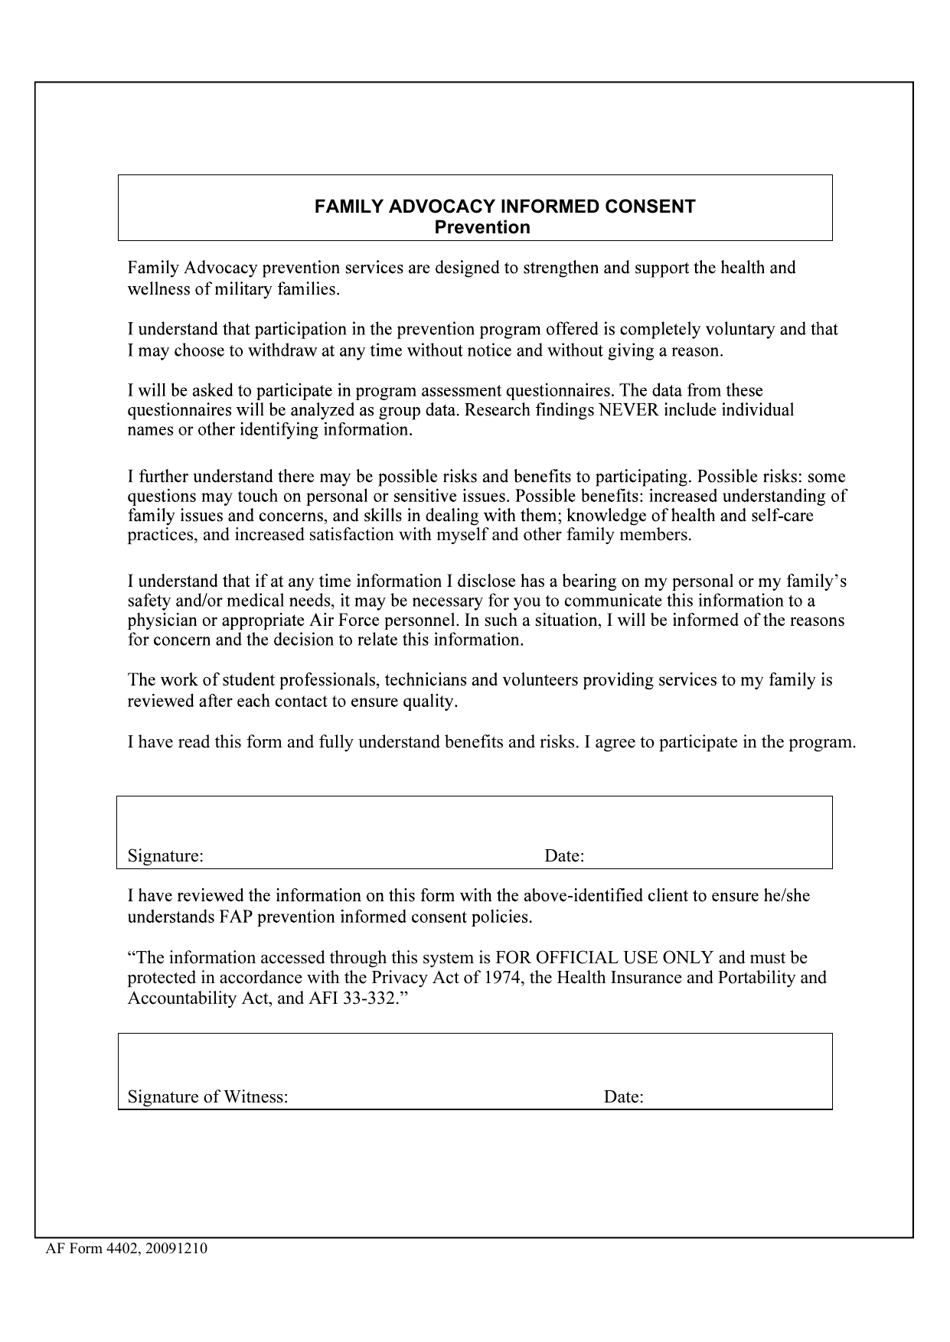 AF Form 4402 Family Advocacy Informed Consent, Page 1